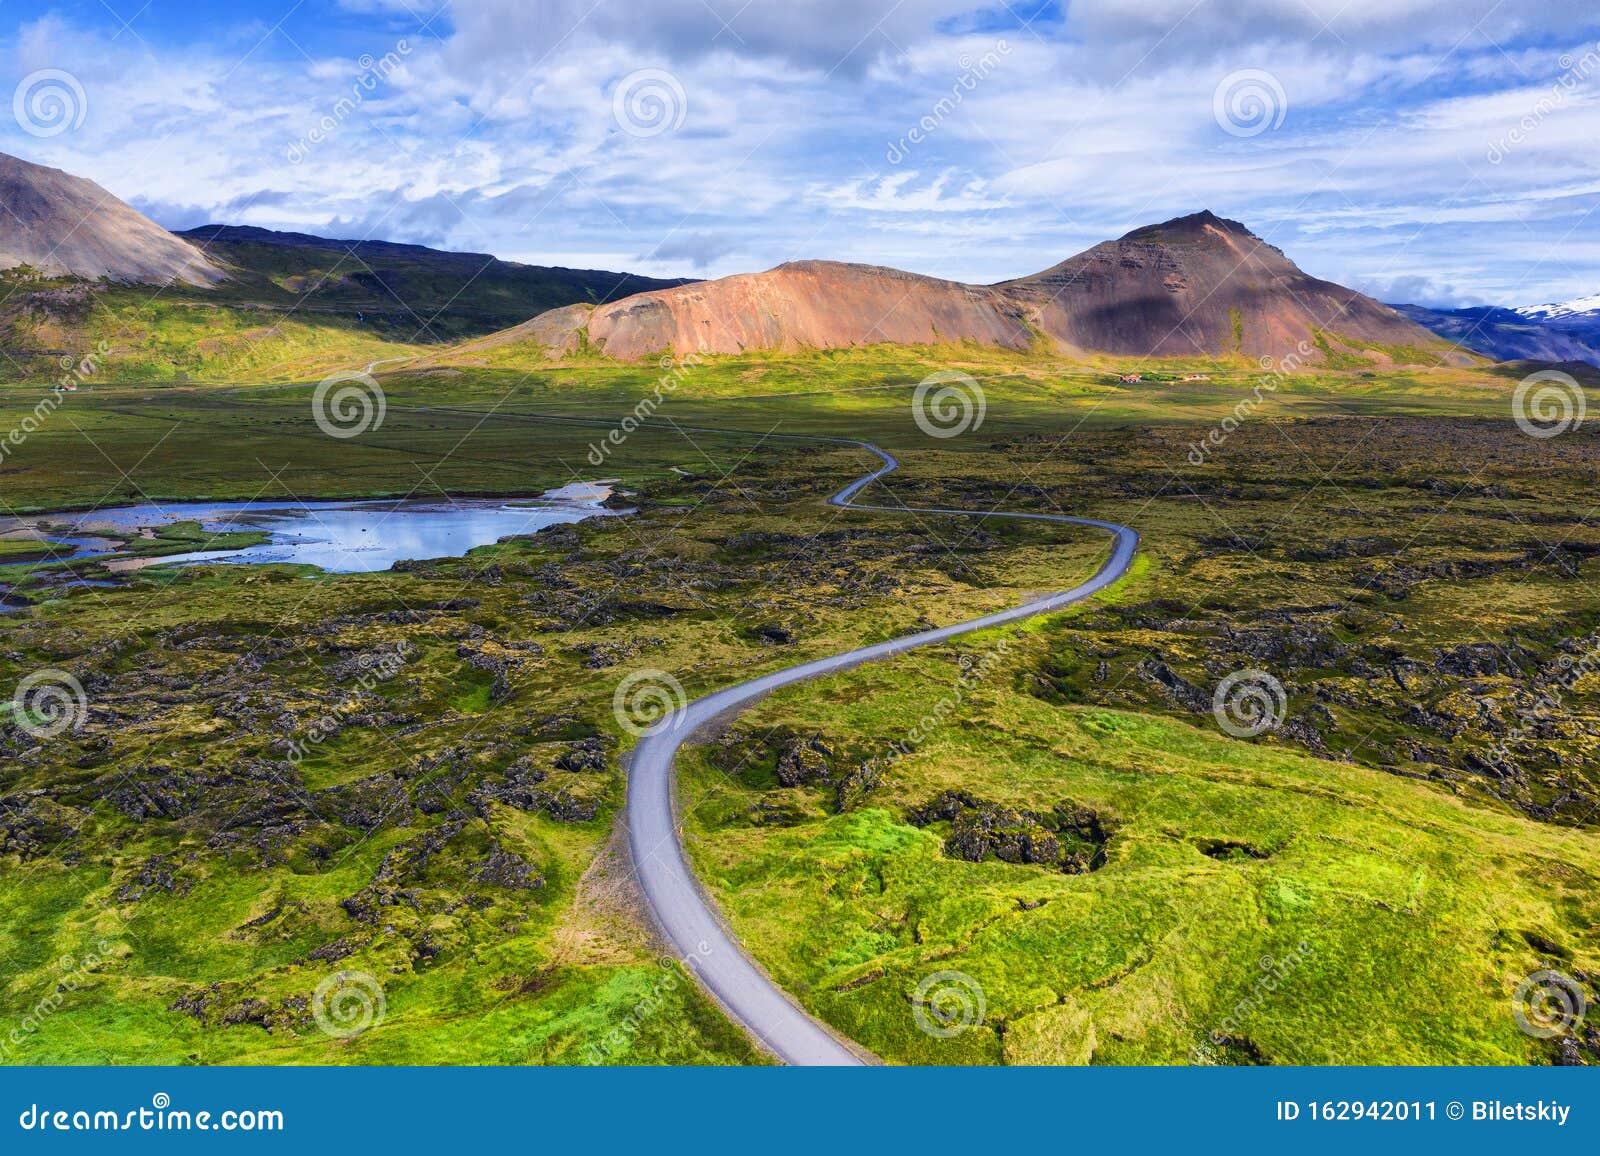 aerial view on road in iceland. aerial landscape above highway in the geysers valley. icelandic landscape from air. famous place.